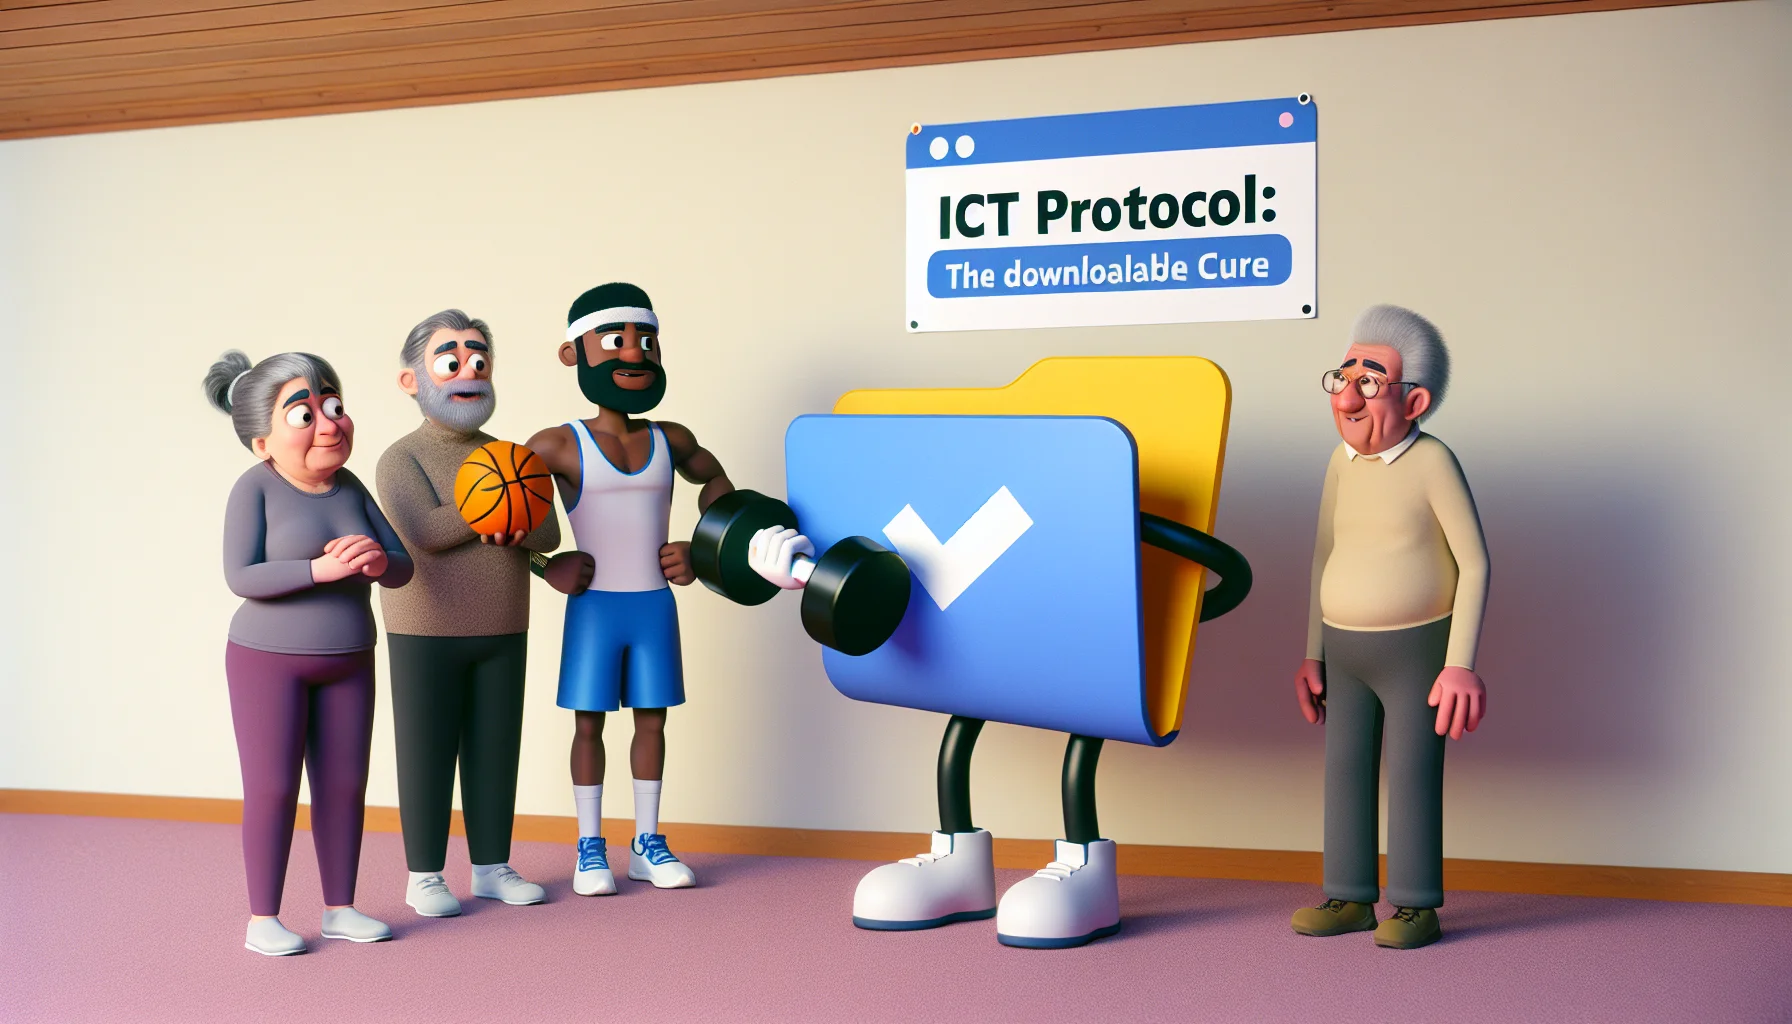 A humorous scene showing a downloadable fitness program, labelled as 'ICT Protocol: The Downloadable Cure'. Imagine it as an anthropomorphised cartoon file icon holding a dumbbell and encouraging a diverse group of people to join it in exercising. The people should include a middle-aged Caucasian woman in a yoga outfit, a young Hispanic man in basketball gear, a Black woman in her 30s in running clothes, and an elderly South Asian man in comfortable exercise clothes, all looking amused and eager to participate.